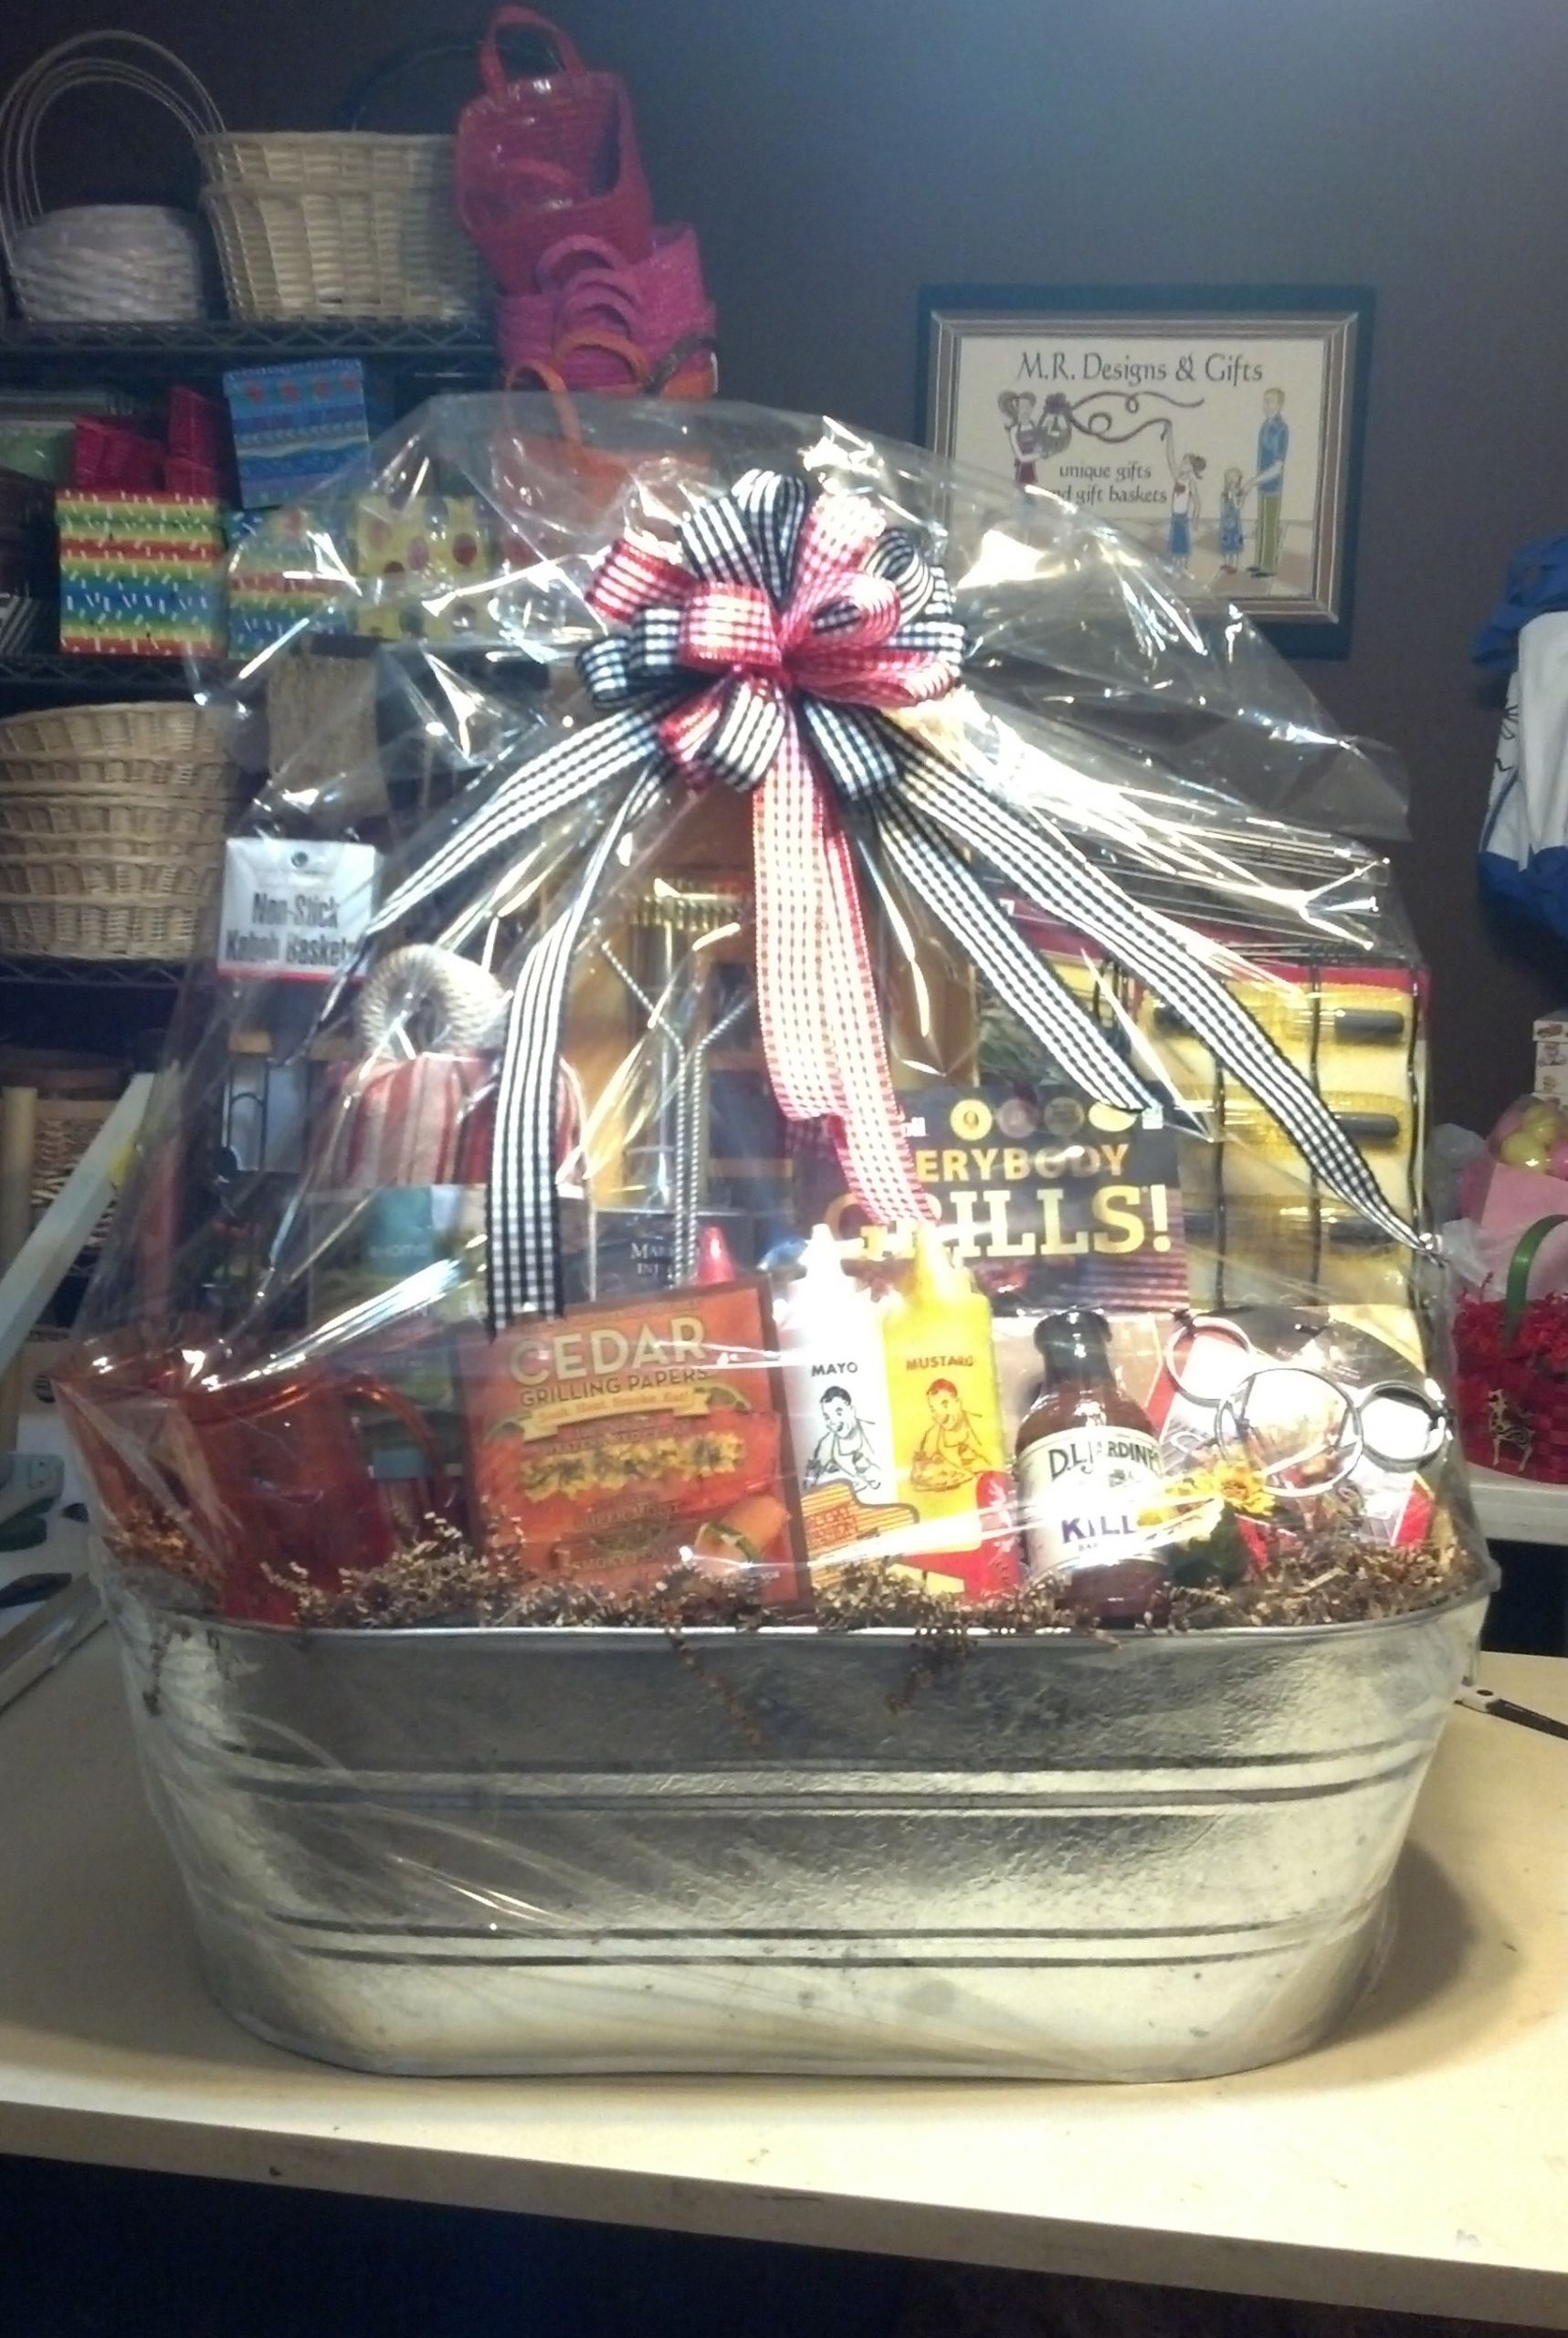 Gift Basket Ideas For Silent Auction
 Special Event and Silent Auction Gift Basket Ideas by M R